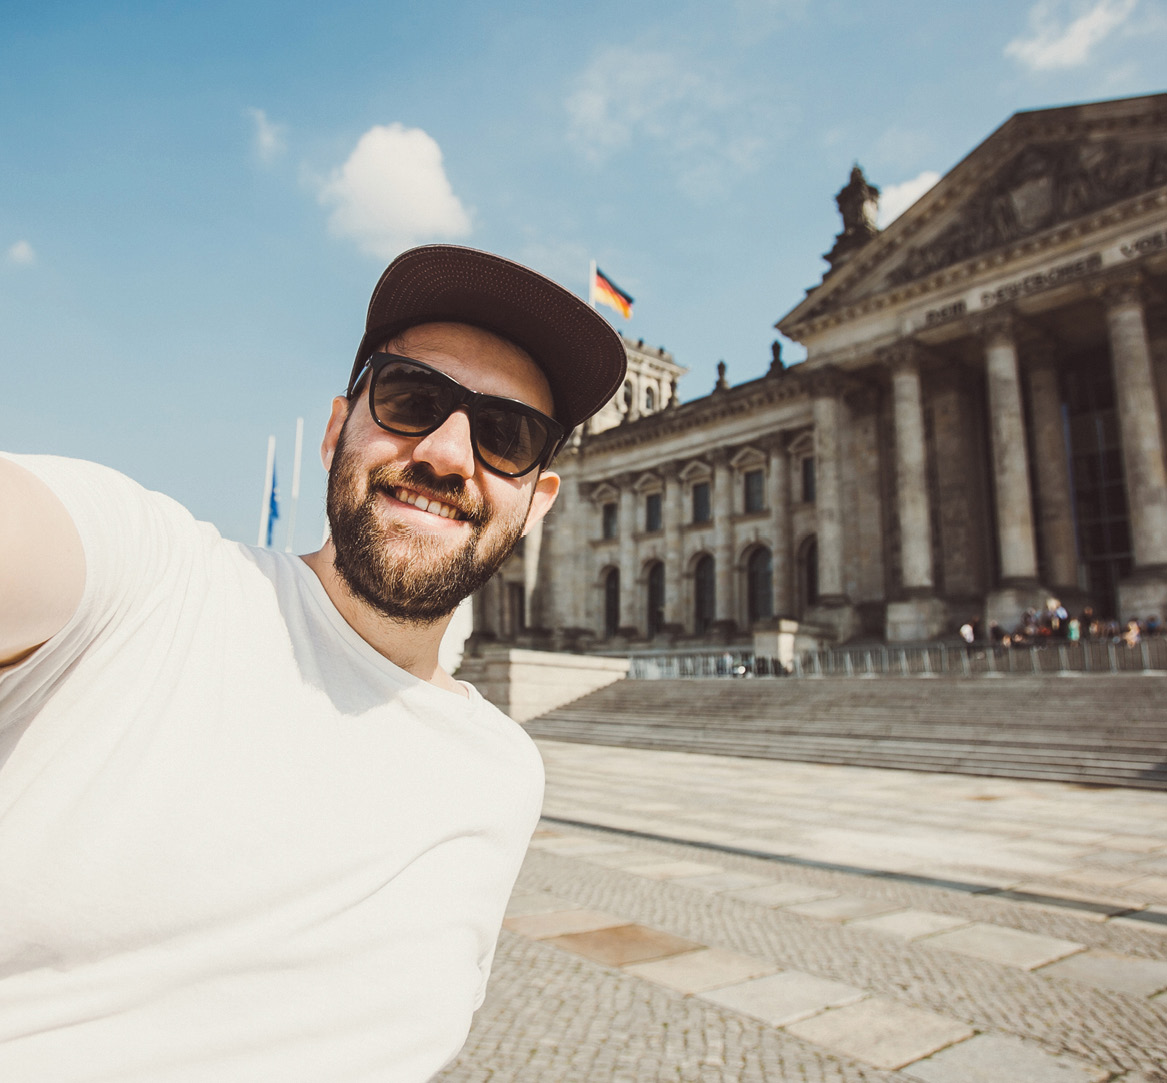 A student takes a selfie in Berlin, Germany.